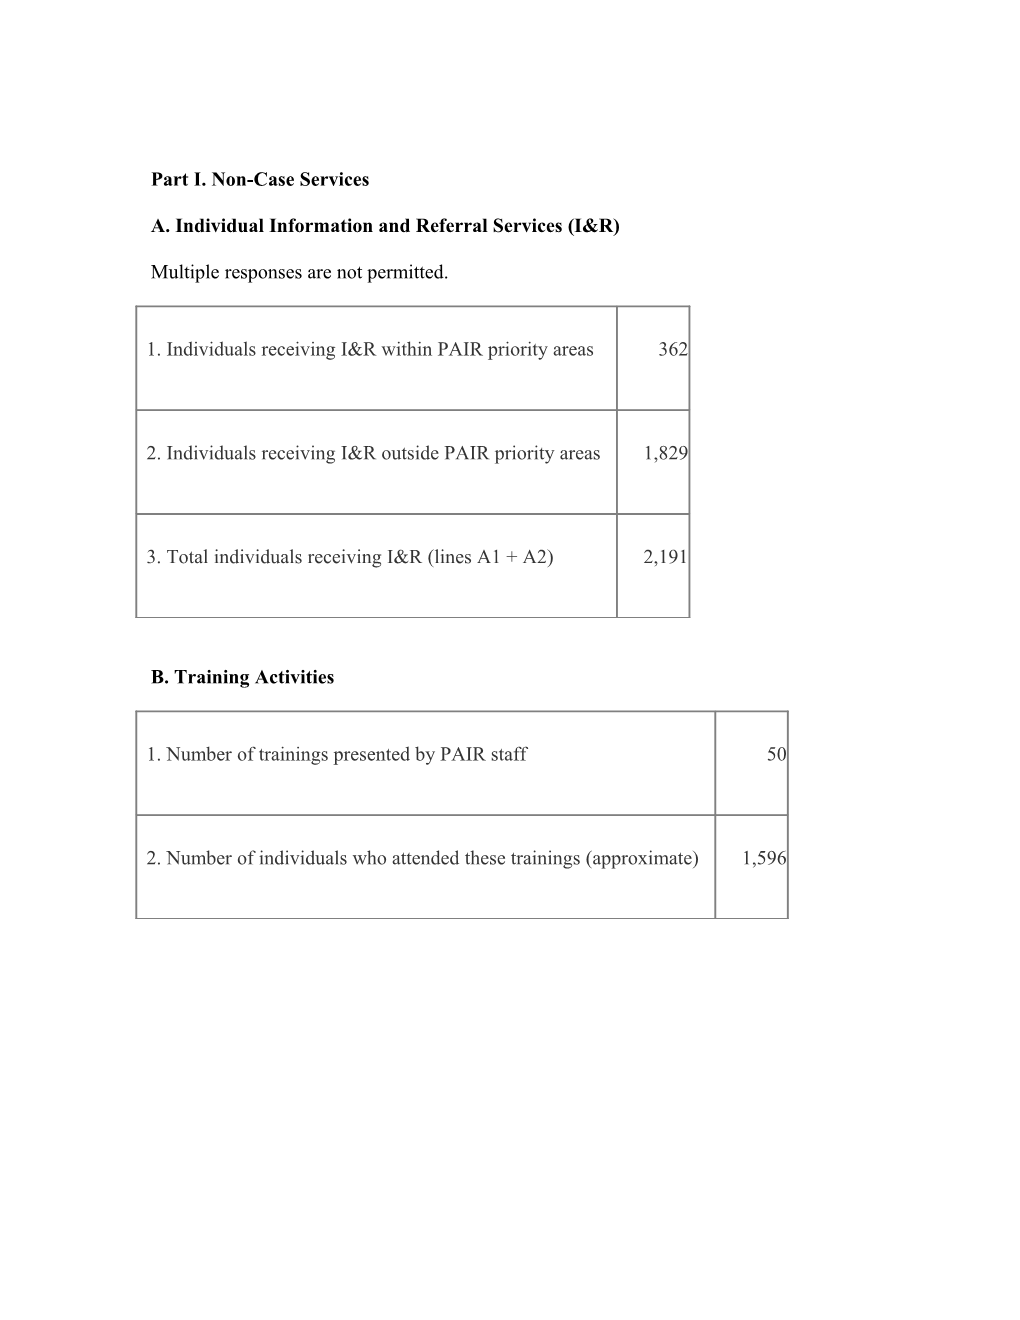 RSA-509 - Protection & Advocacy of Individual Rights (PAIR) Program Performance Report